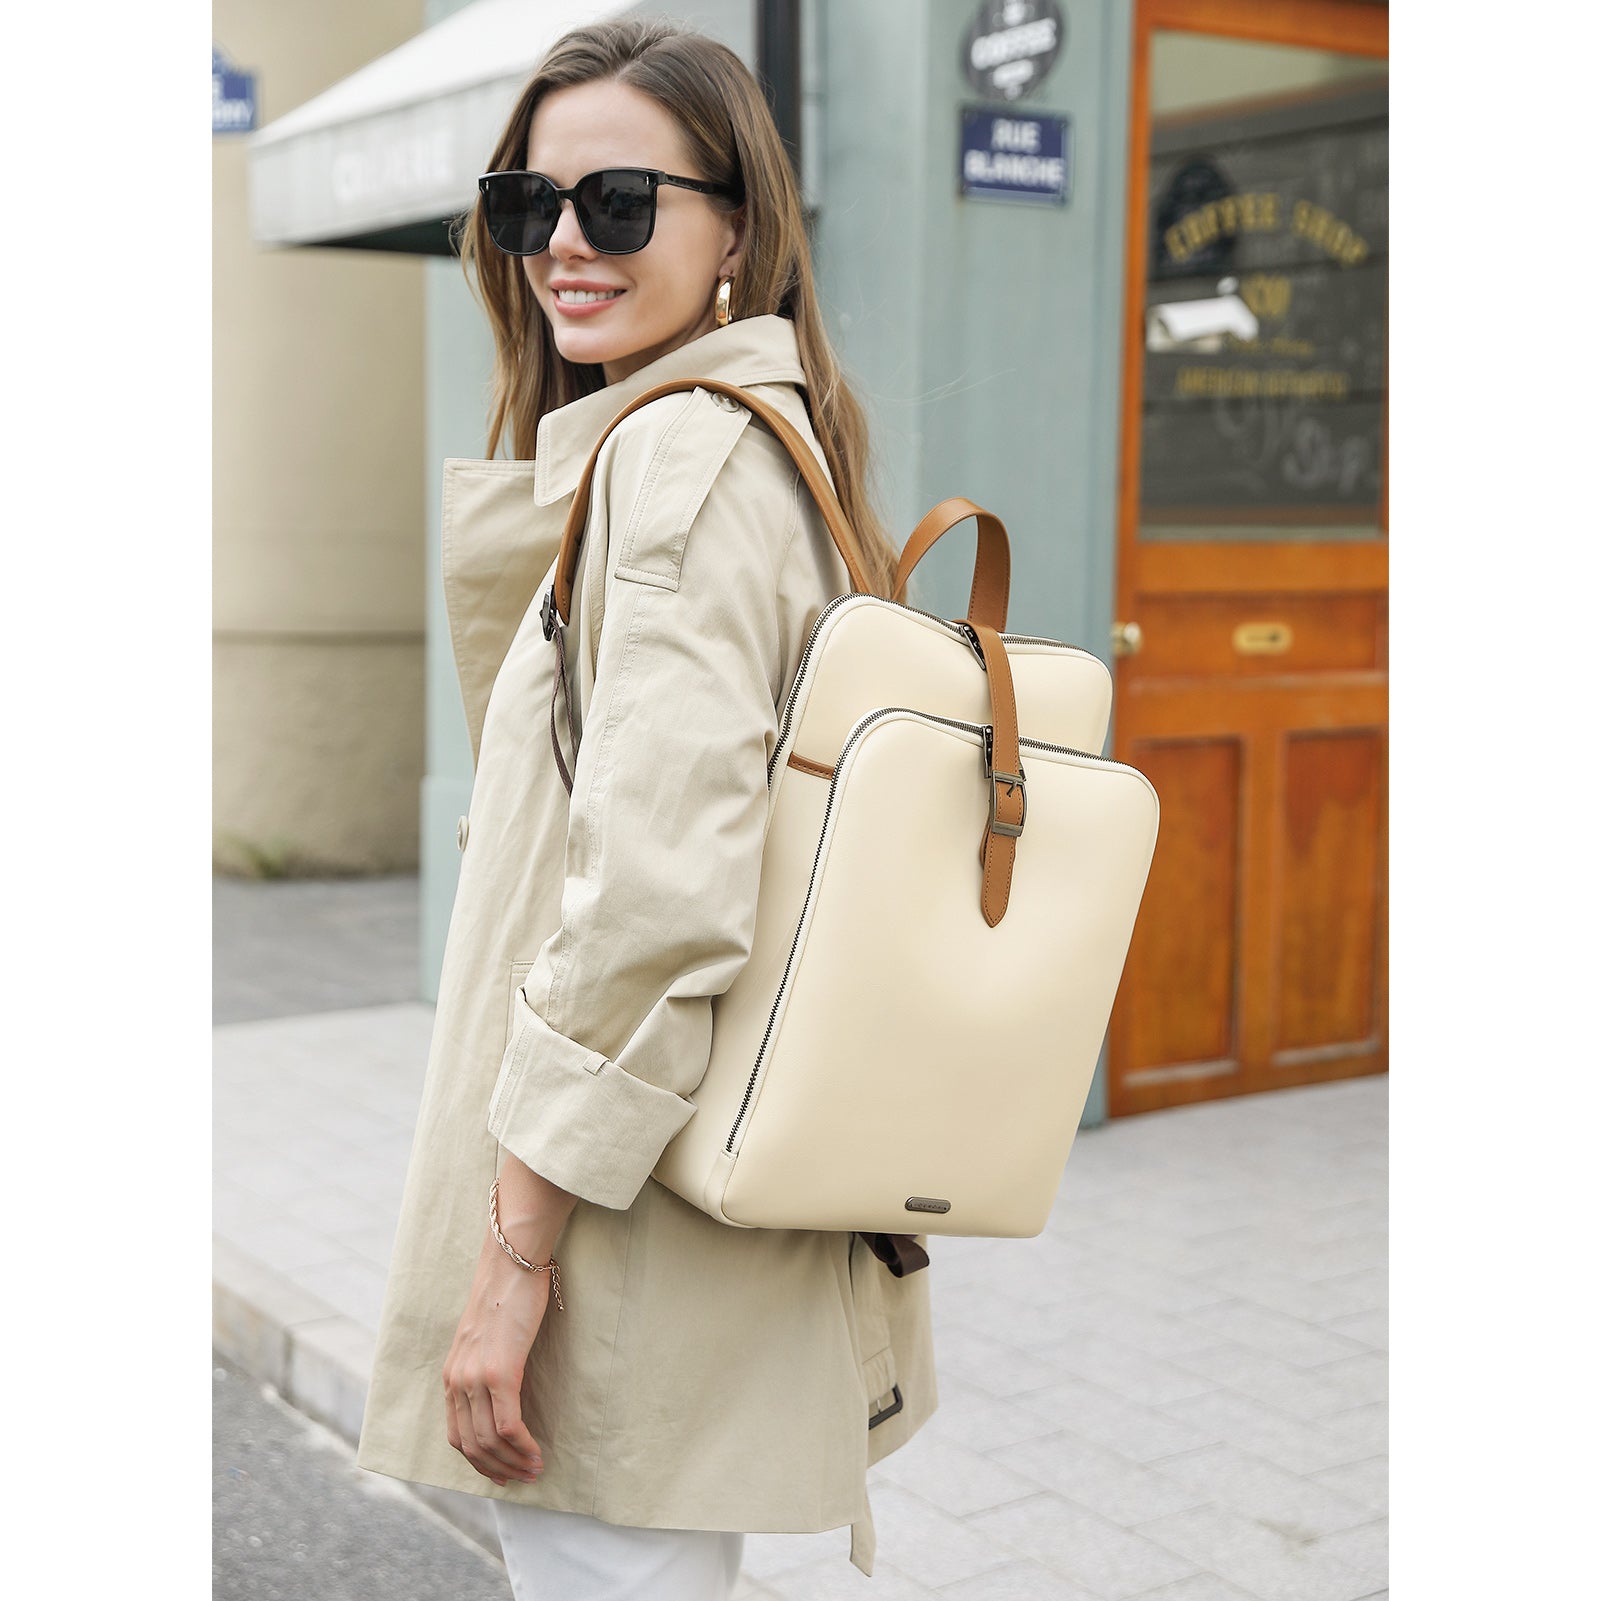 Vegetable Tanned Small Leather Backpack: V-25